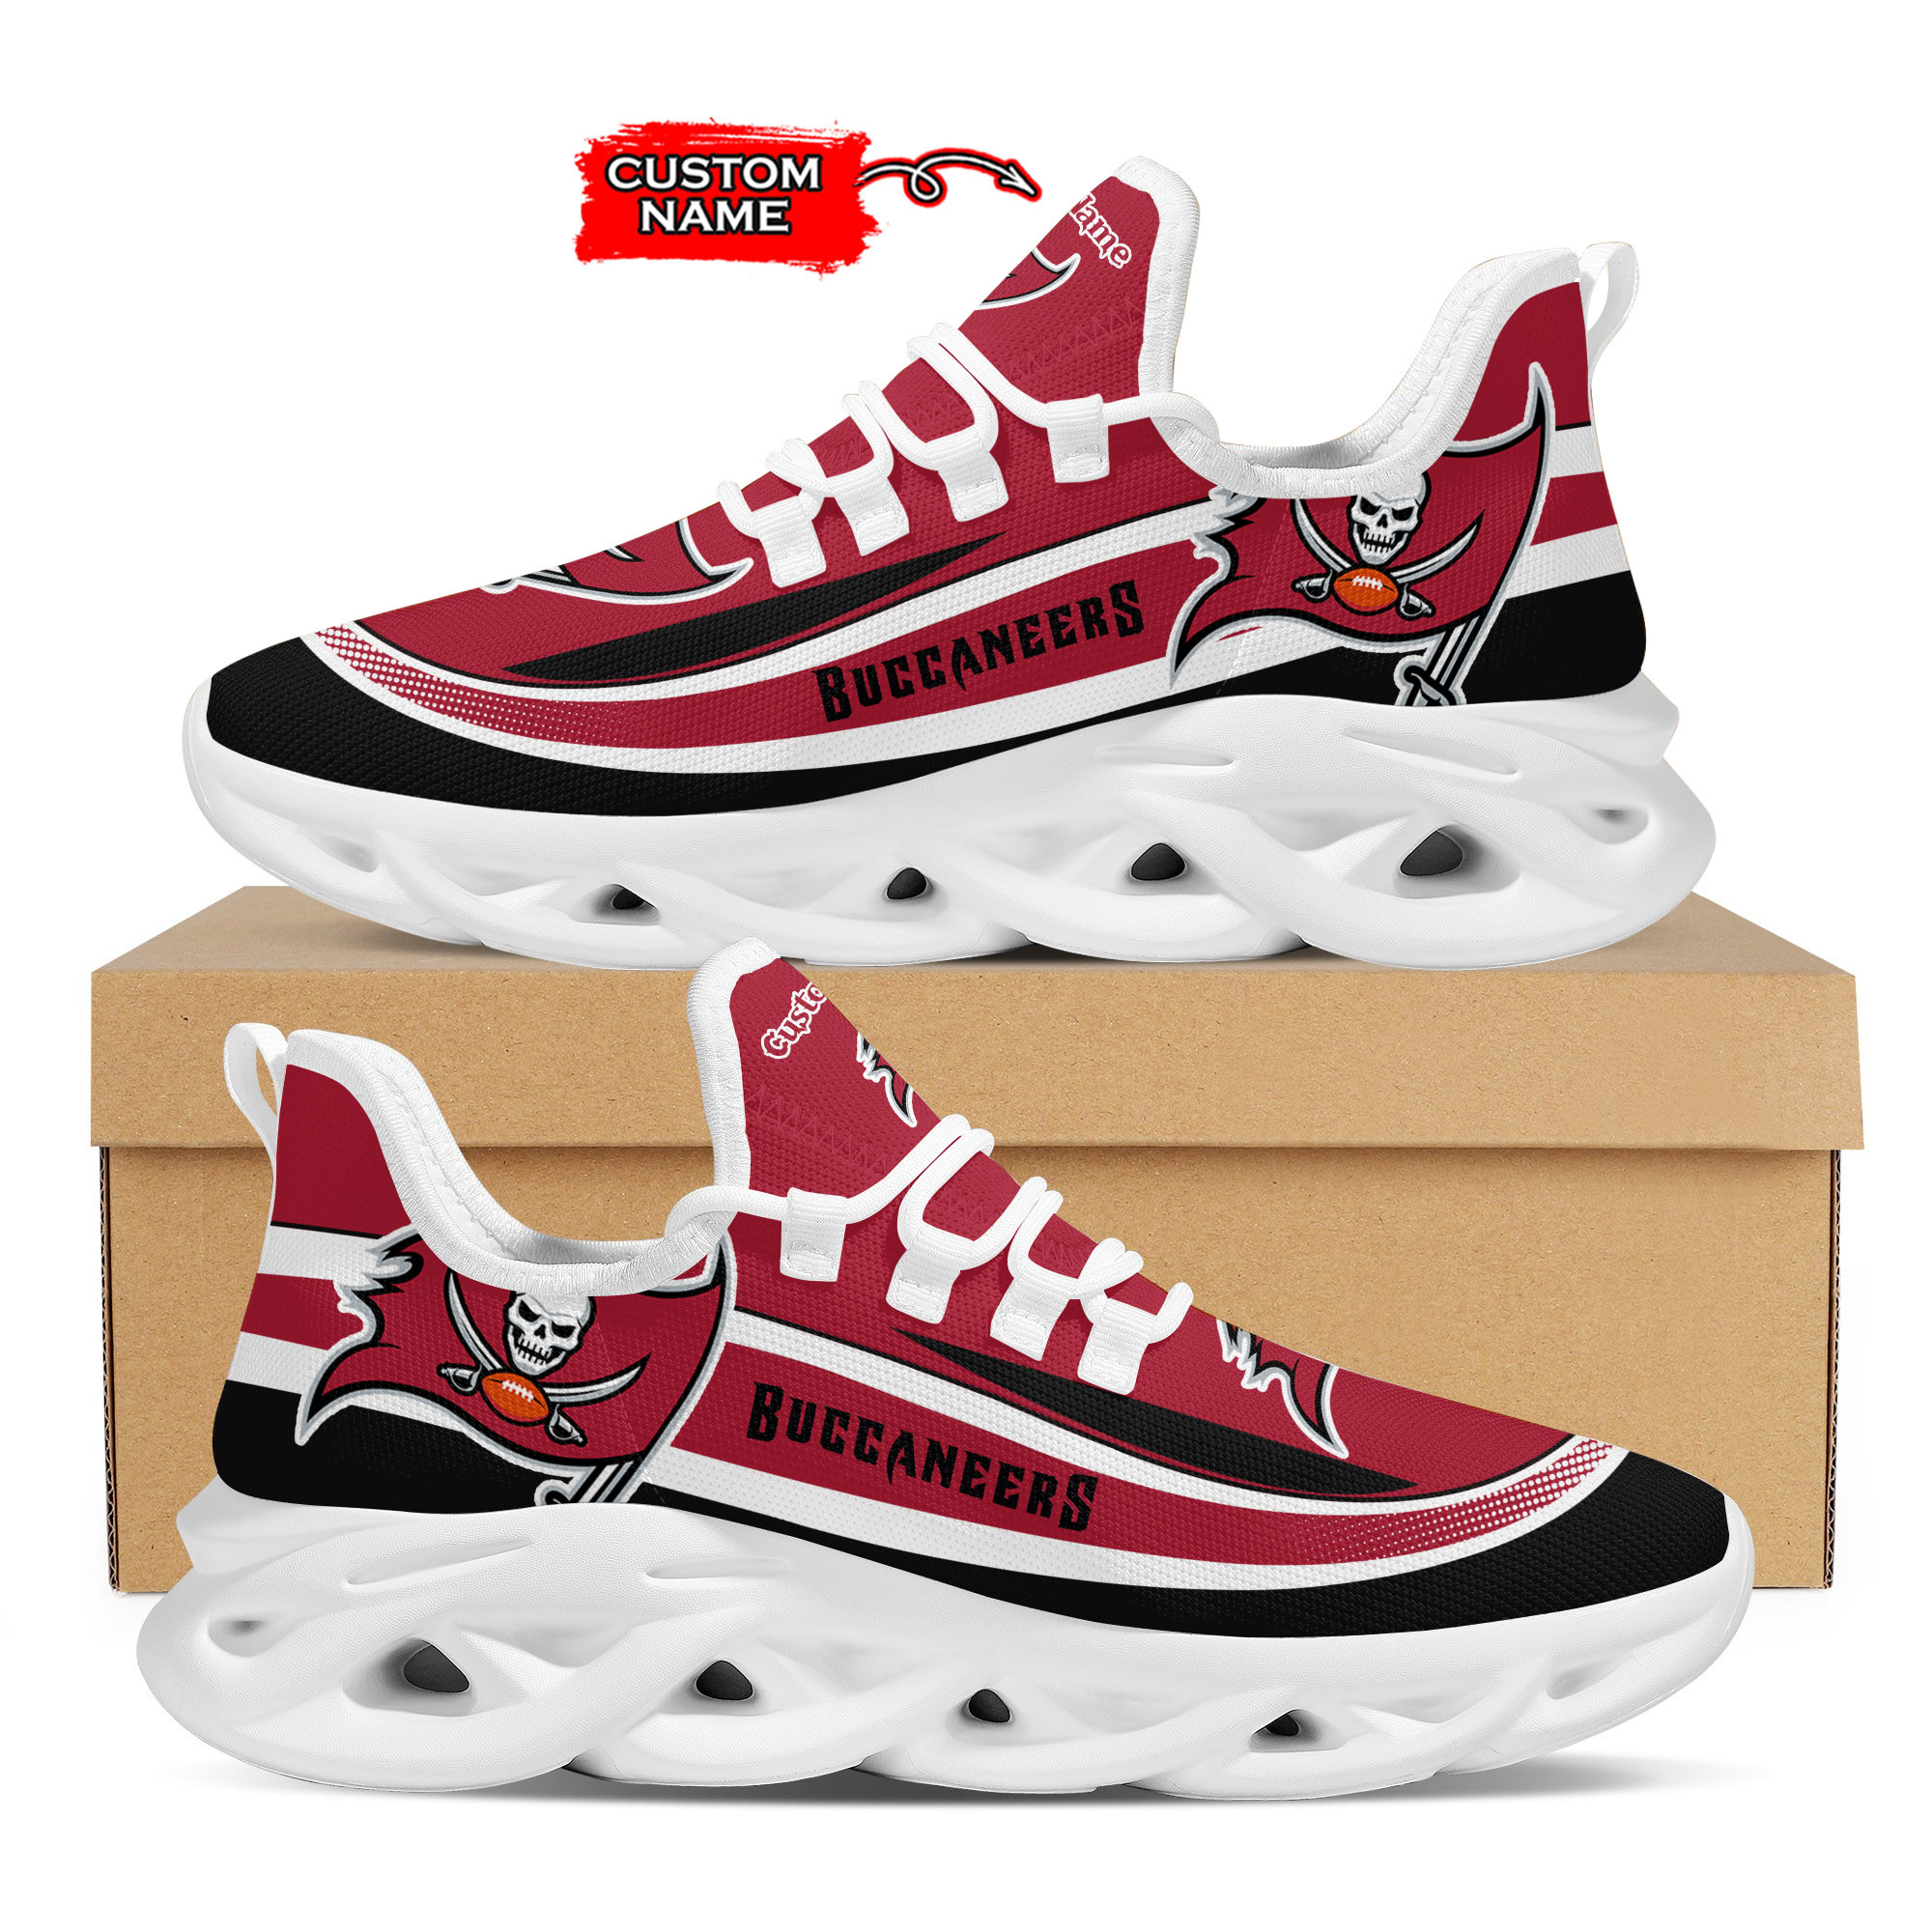 Tampa Bay Buccaneers Nfl Custom Name Clunky Max Soul Shoes Sneakers For Mens Womens Personalized Gifts – Hothot